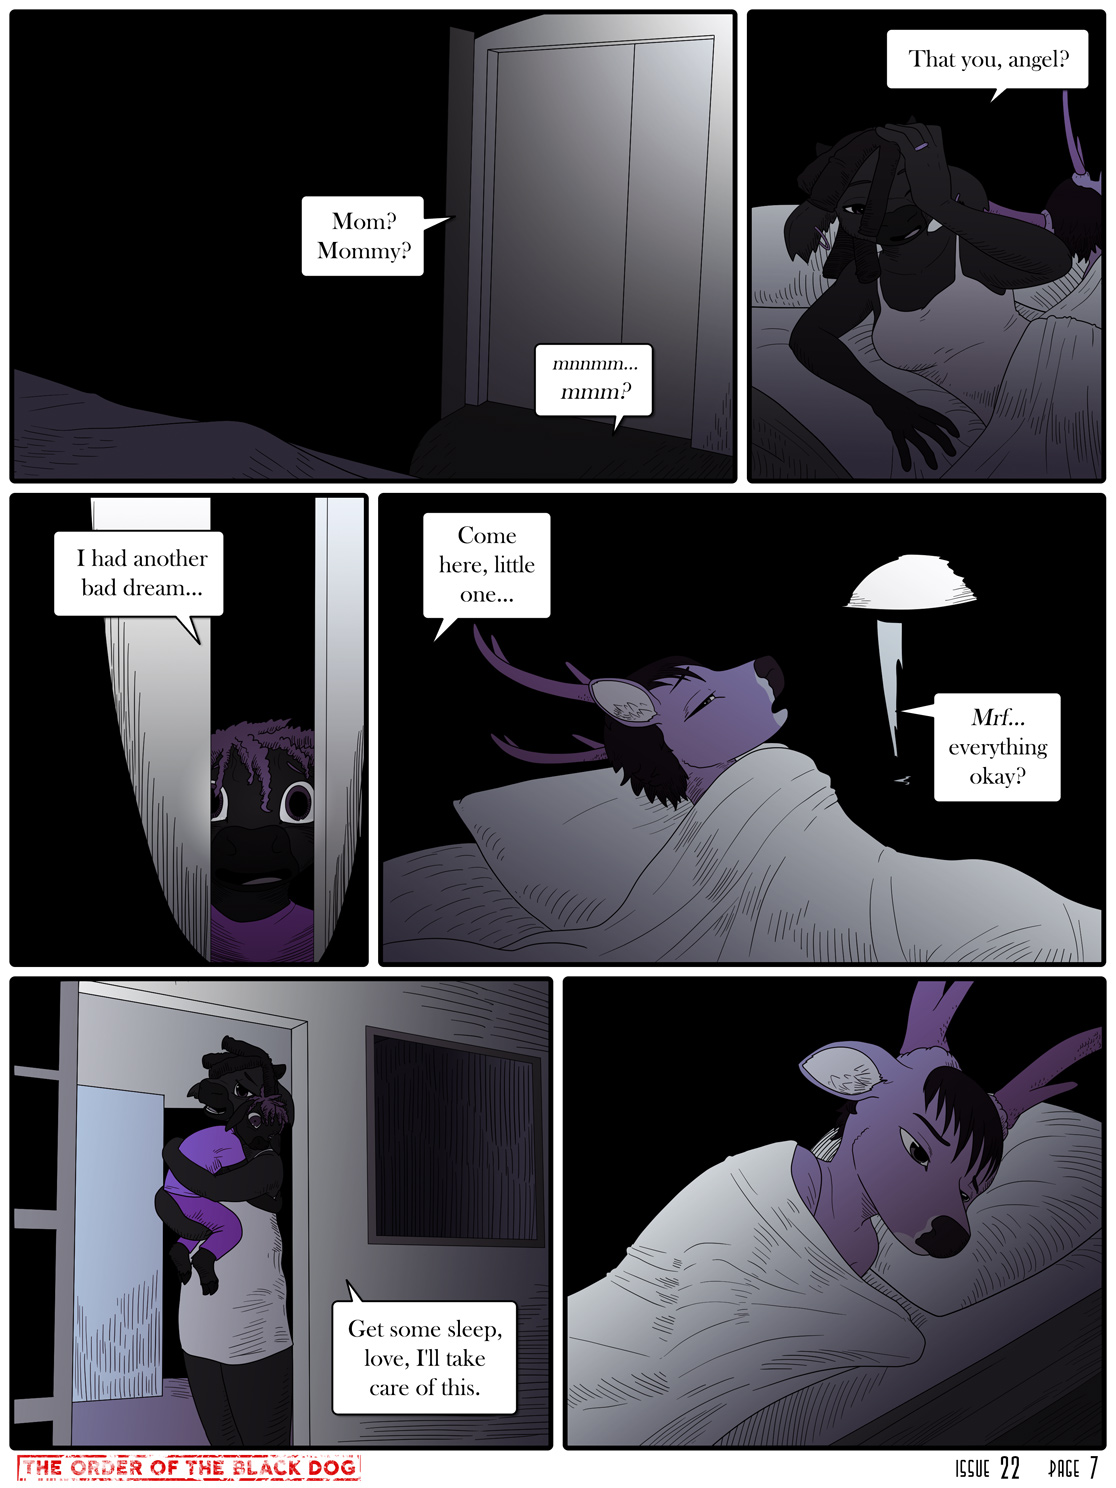 Issue 22, Page 7